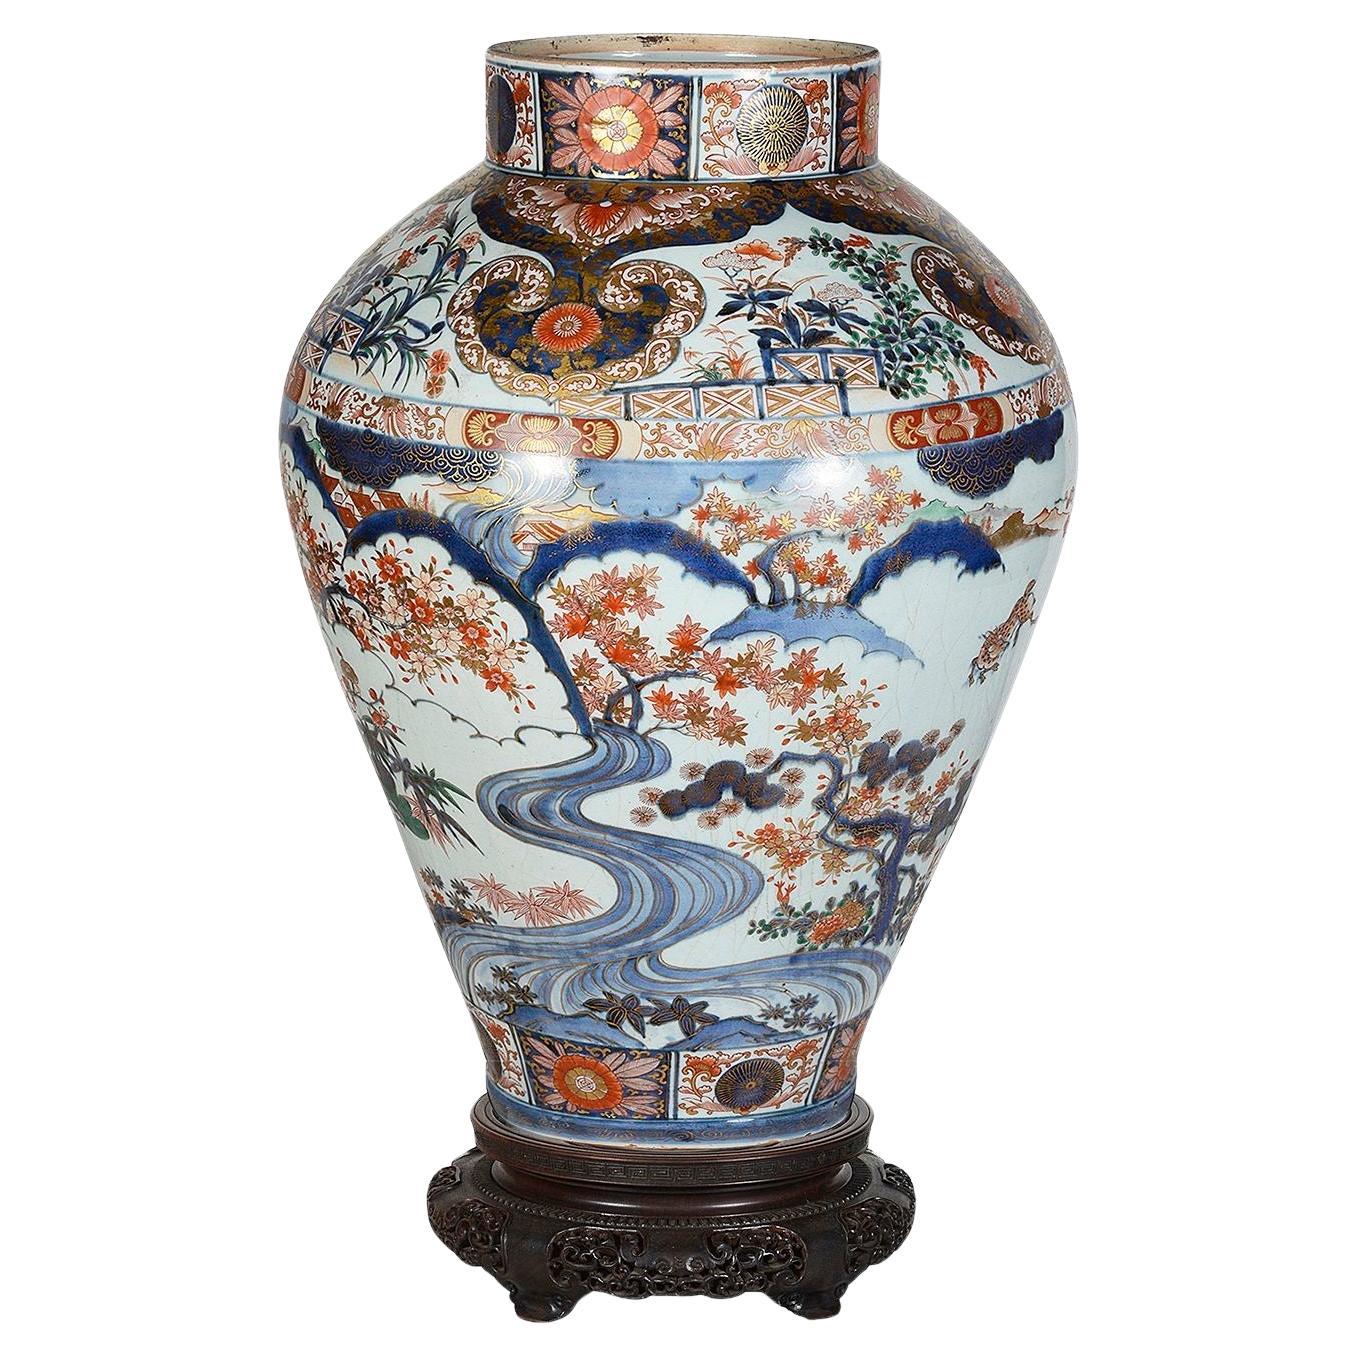 A spectacular 18th Century Japanese Arita Imari vase on stand. Having wonderful bold colouring. Having wonderful scrolling motif and foliate decoration. Scenes of deer feeding under blossom trees, with clouds and mountains in the background. Mounted